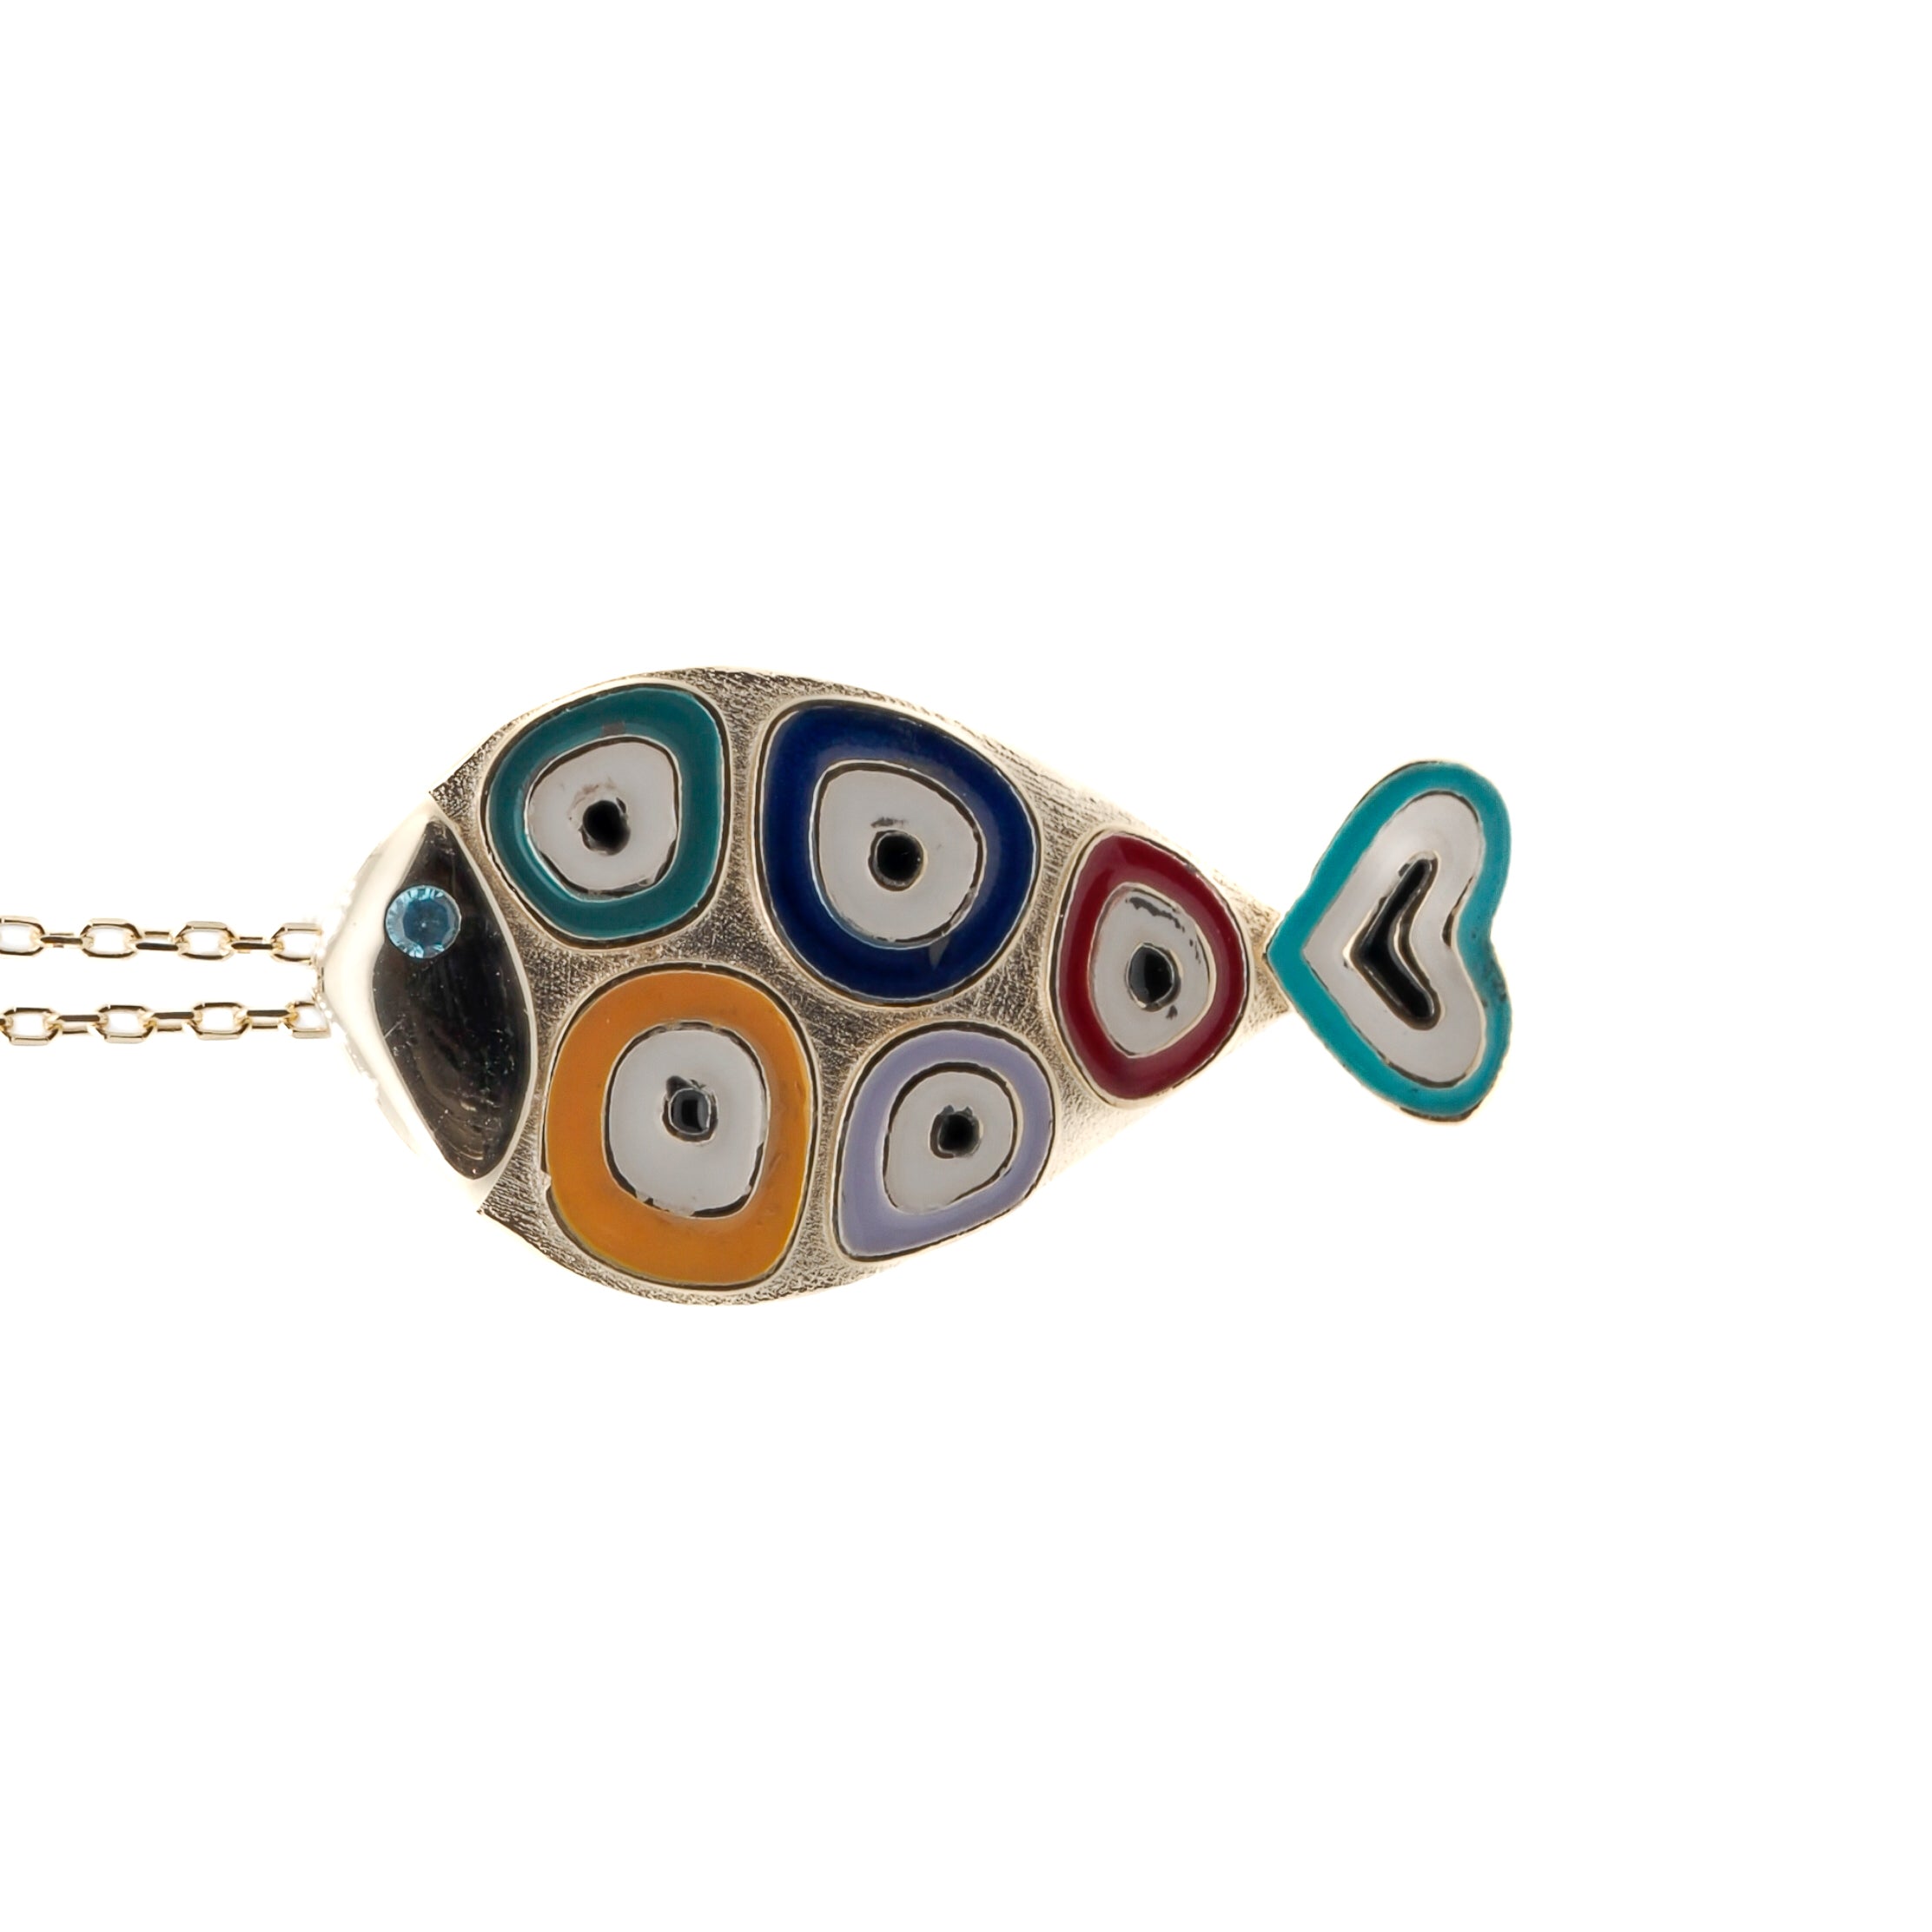 Handcrafted Gold and Enamel Fish Pendant Necklace - Unique necklace made from high-quality 925 Sterling silver on 18K gold plated chain with a vibrant enamel pendant depicting a fish and surrounding evil eye designs.